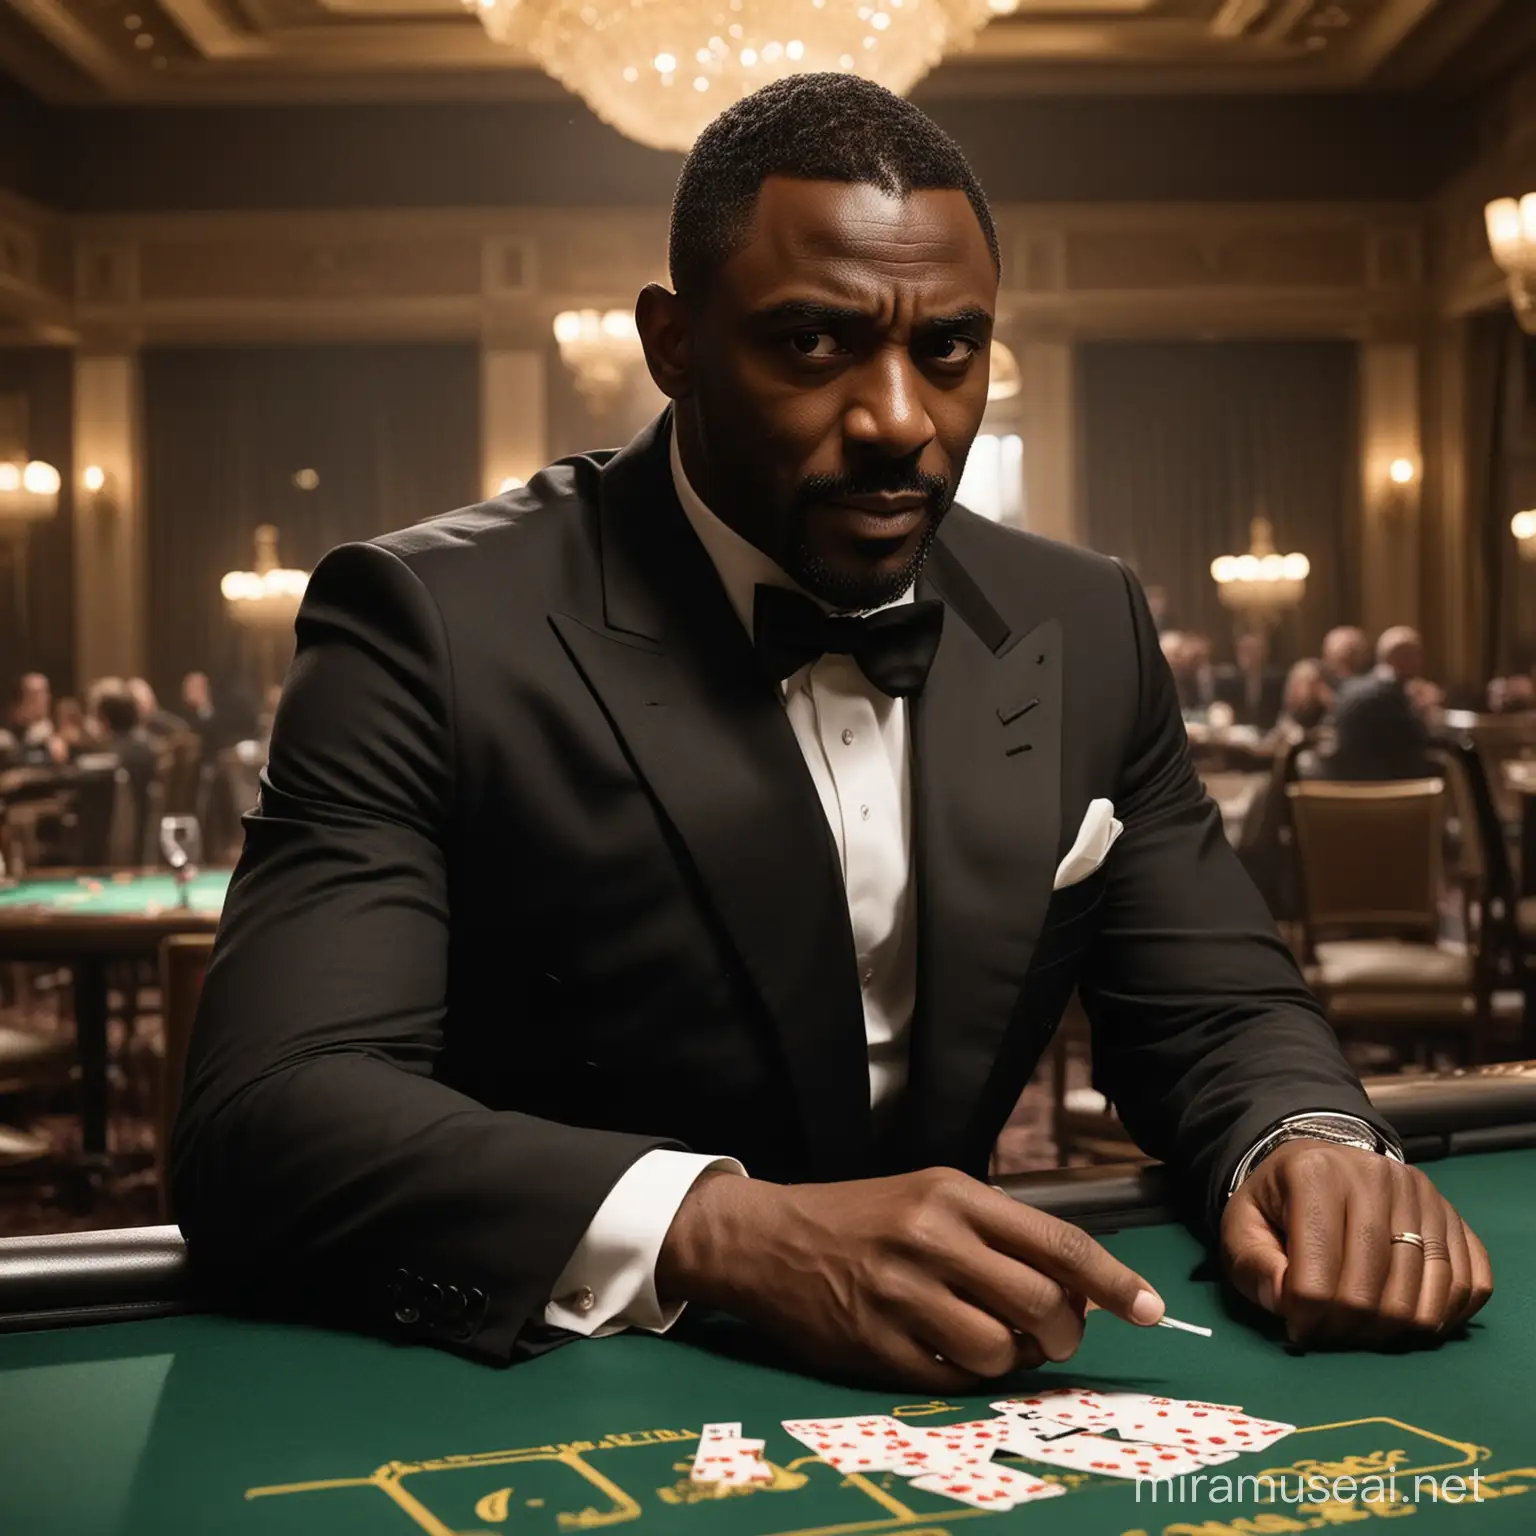 In the dimly lit casino, the camera slowly pans across the elegant room, revealing Idris Elba, impeccably dressed in a tailored tuxedo, seated at a baccarat table. His steely gaze meets the camera with an air of confidence and intrigue as he casually sips a martini, embodying the suave sophistication of James Bond.

Suddenly, the tension rises as Elba's Bond engages in a high-stakes game with a notorious adversary. With each flick of the cards, his charm and intellect are on full display, captivating both his opponents and the audience alike. As the game intensifies, Elba's Bond remains cool and composed, his razor-sharp wit cutting through the tension-filled atmosphere.

Moments later, chaos erupts as the room is engulfed in a flurry of action. Elba springs into action, effortlessly dispatching his foes with precision and finesse. In a heart-pounding chase sequence, he navigates through the labyrinthine corridors of the casino, showcasing his athleticism and agility.

Finally, as the dust settles and the threat is neutralized, Elba's Bond stands tall amidst the wreckage, his signature smirk hinting at the countless adventures yet to come. With a nod to the bartender for another martini, he confidently strides out of the casino, leaving behind a trail of admiration and anticipation for his next mission.